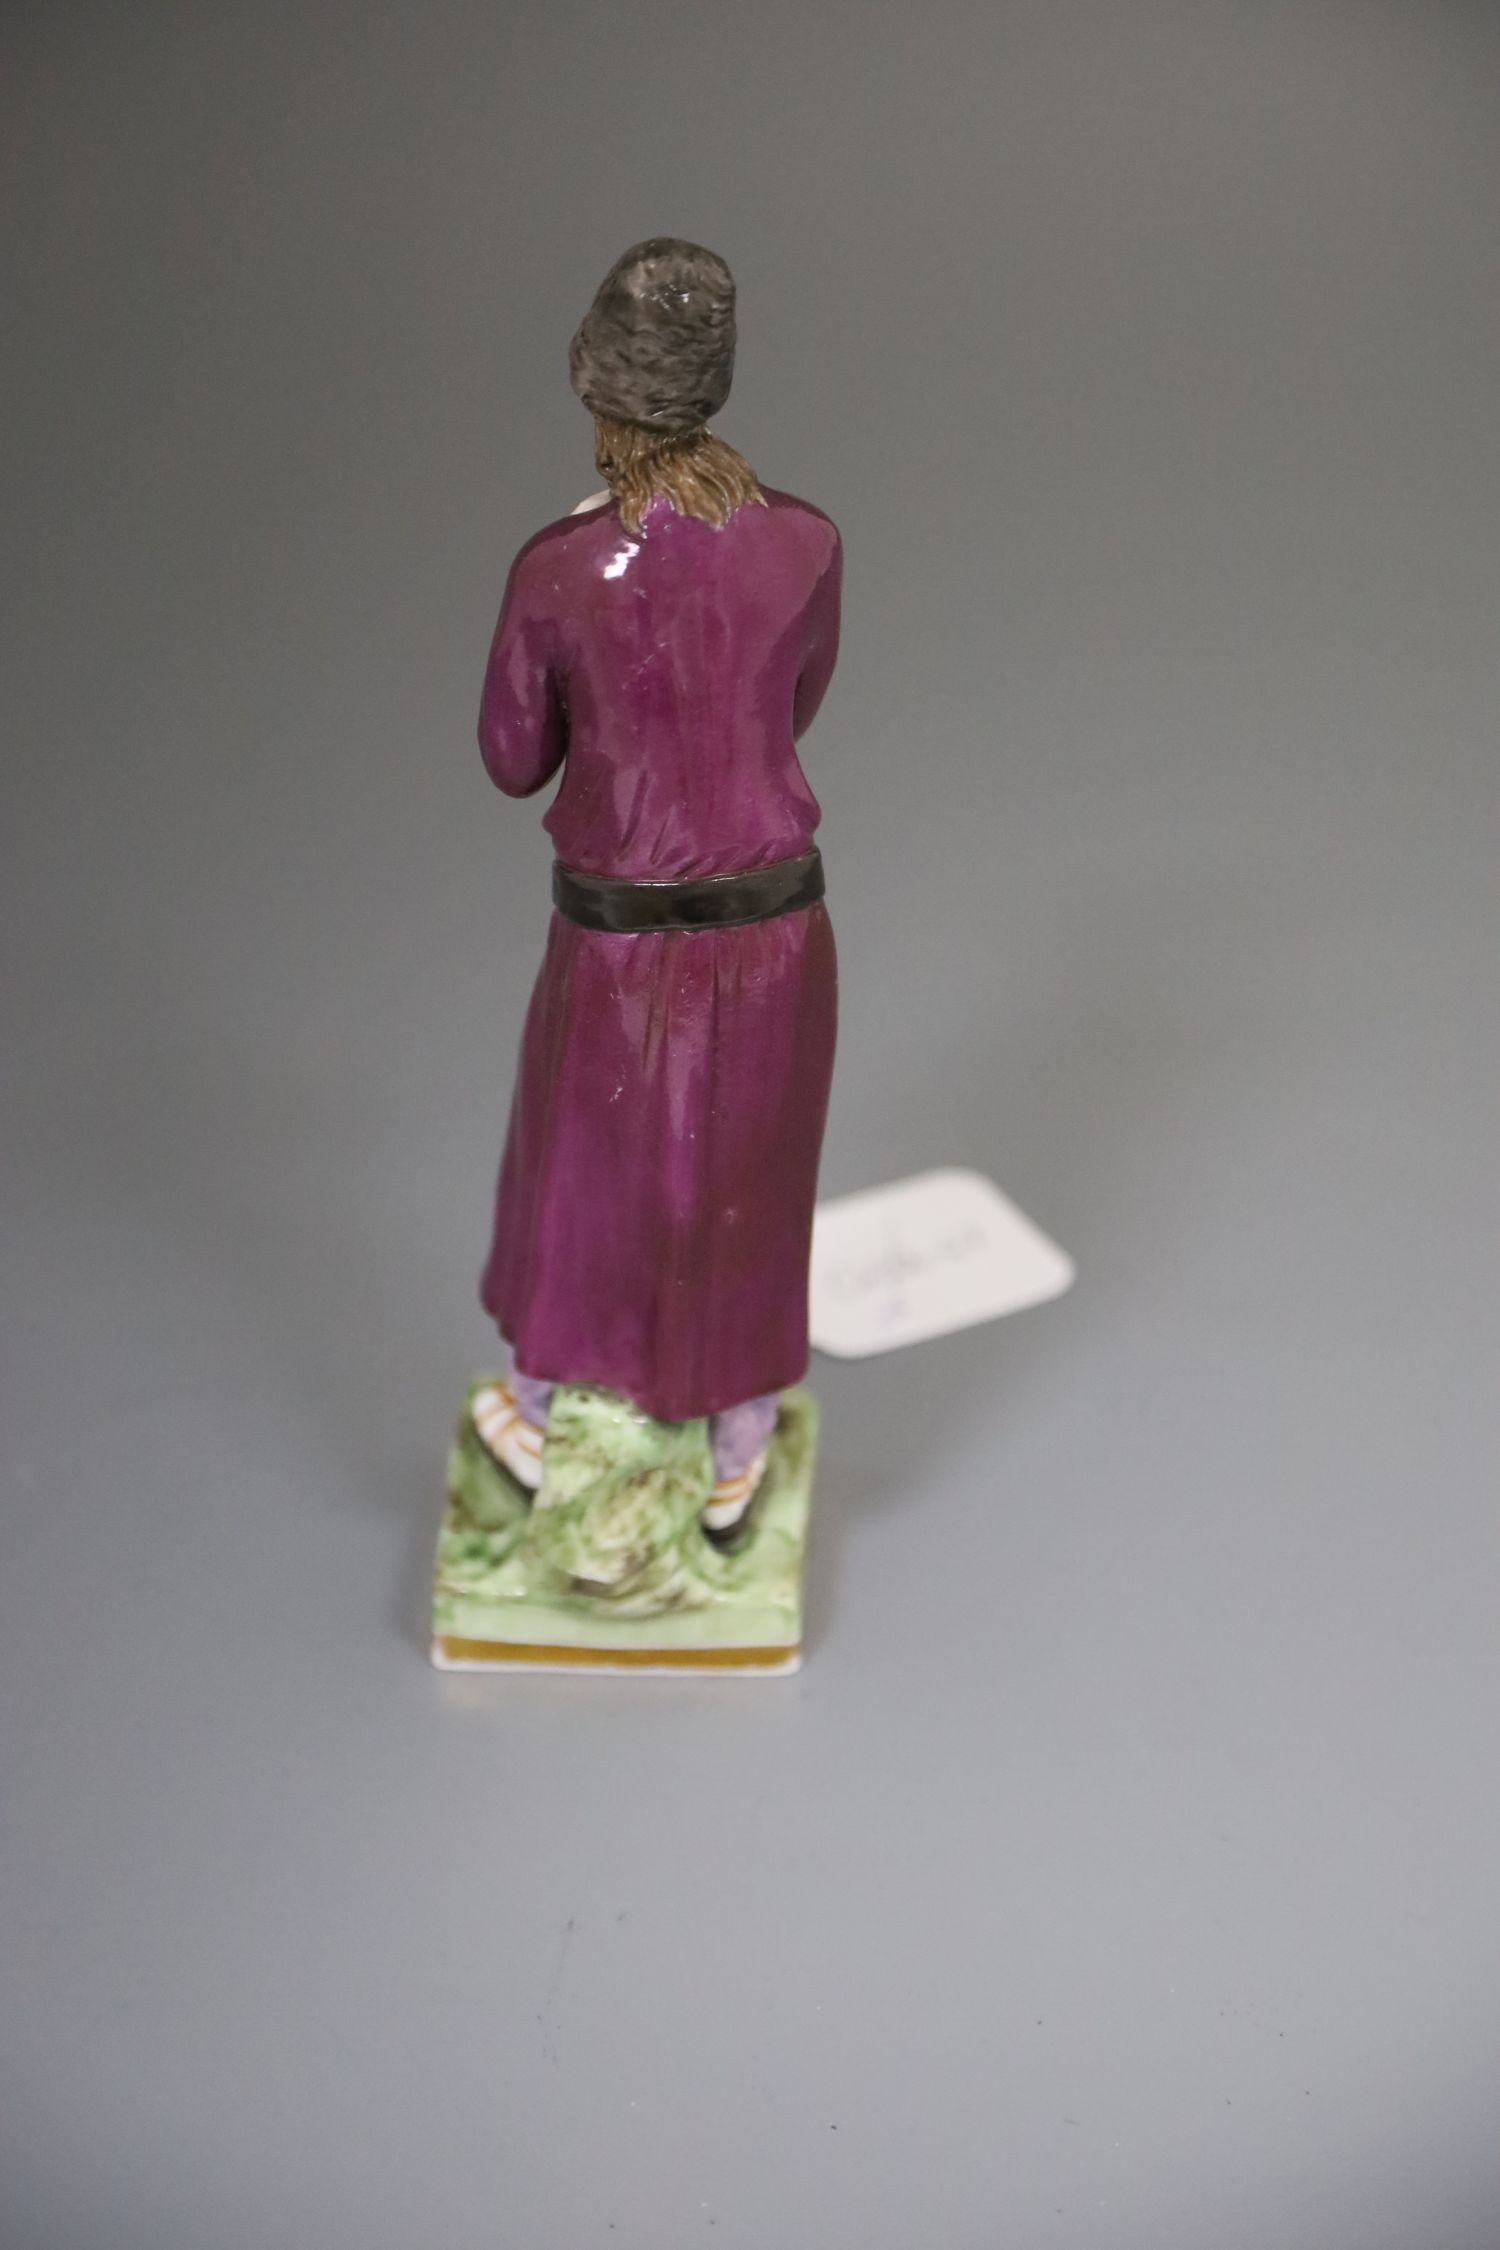 A Russian Gardner porcelain figure of a man holding a staff, mid 19th century, wearing traditional - Image 2 of 7